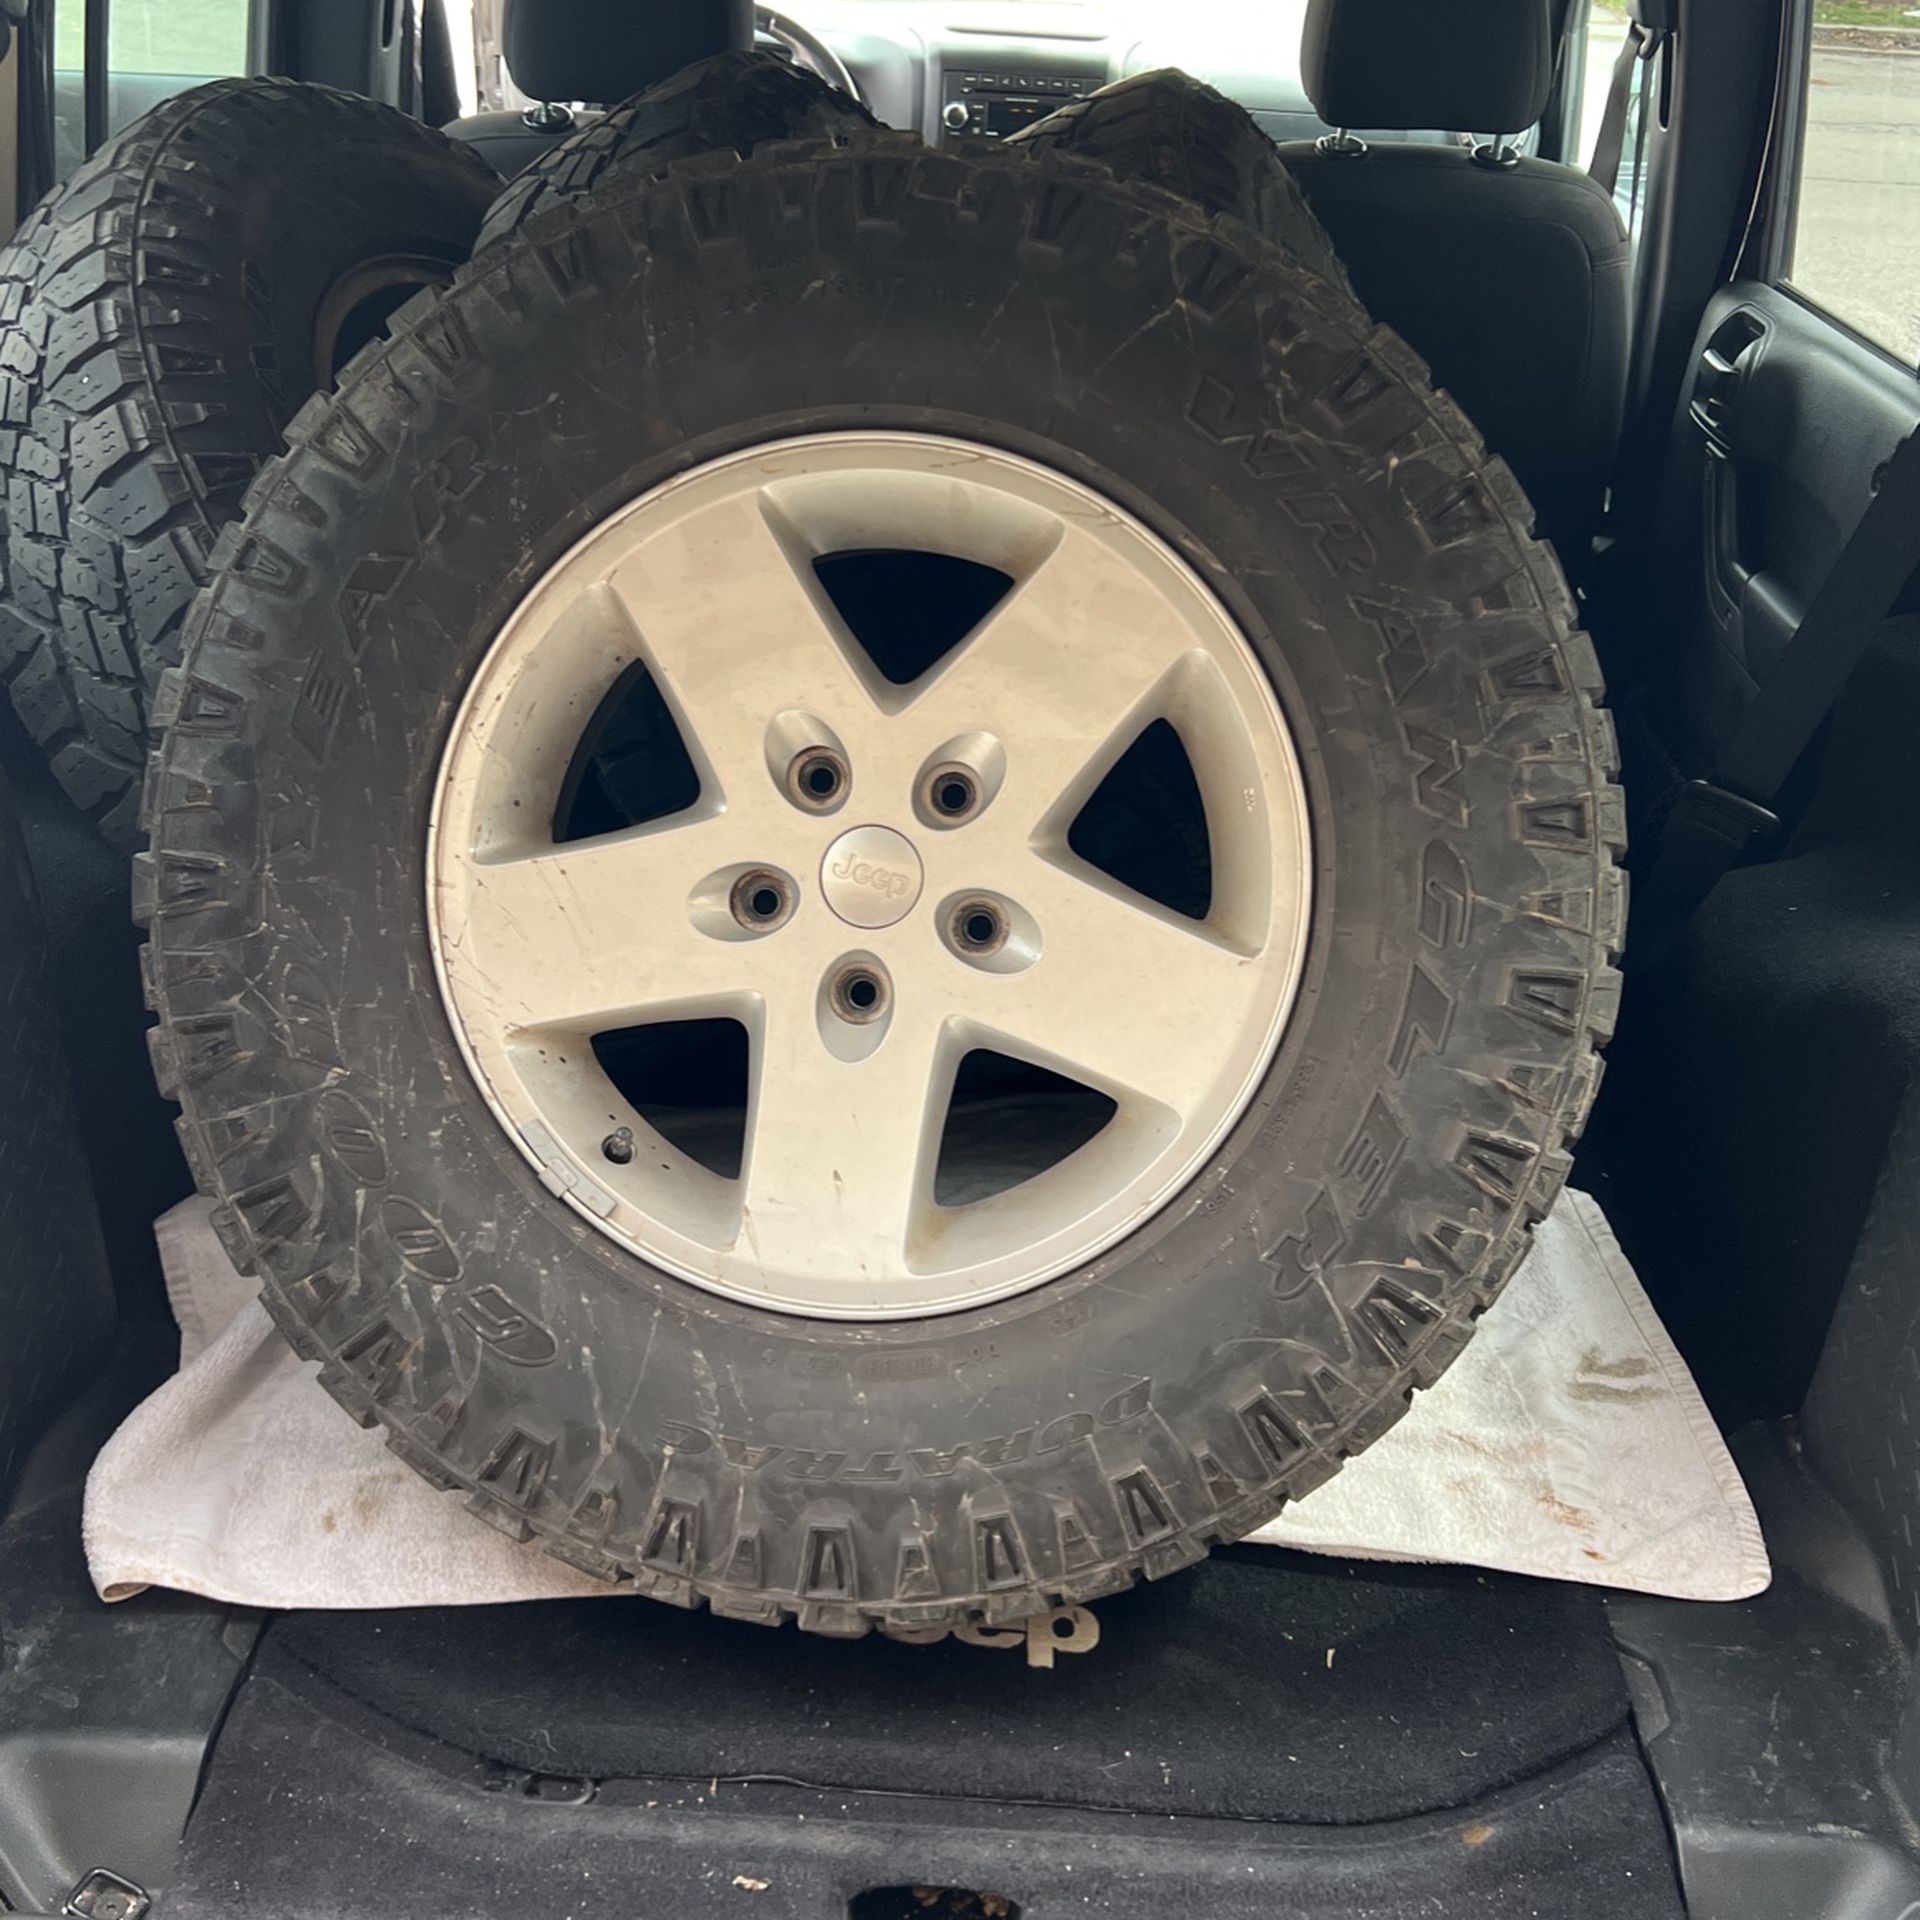 Jeep Wrangler Wheels And Tires With Tpms Sensors 